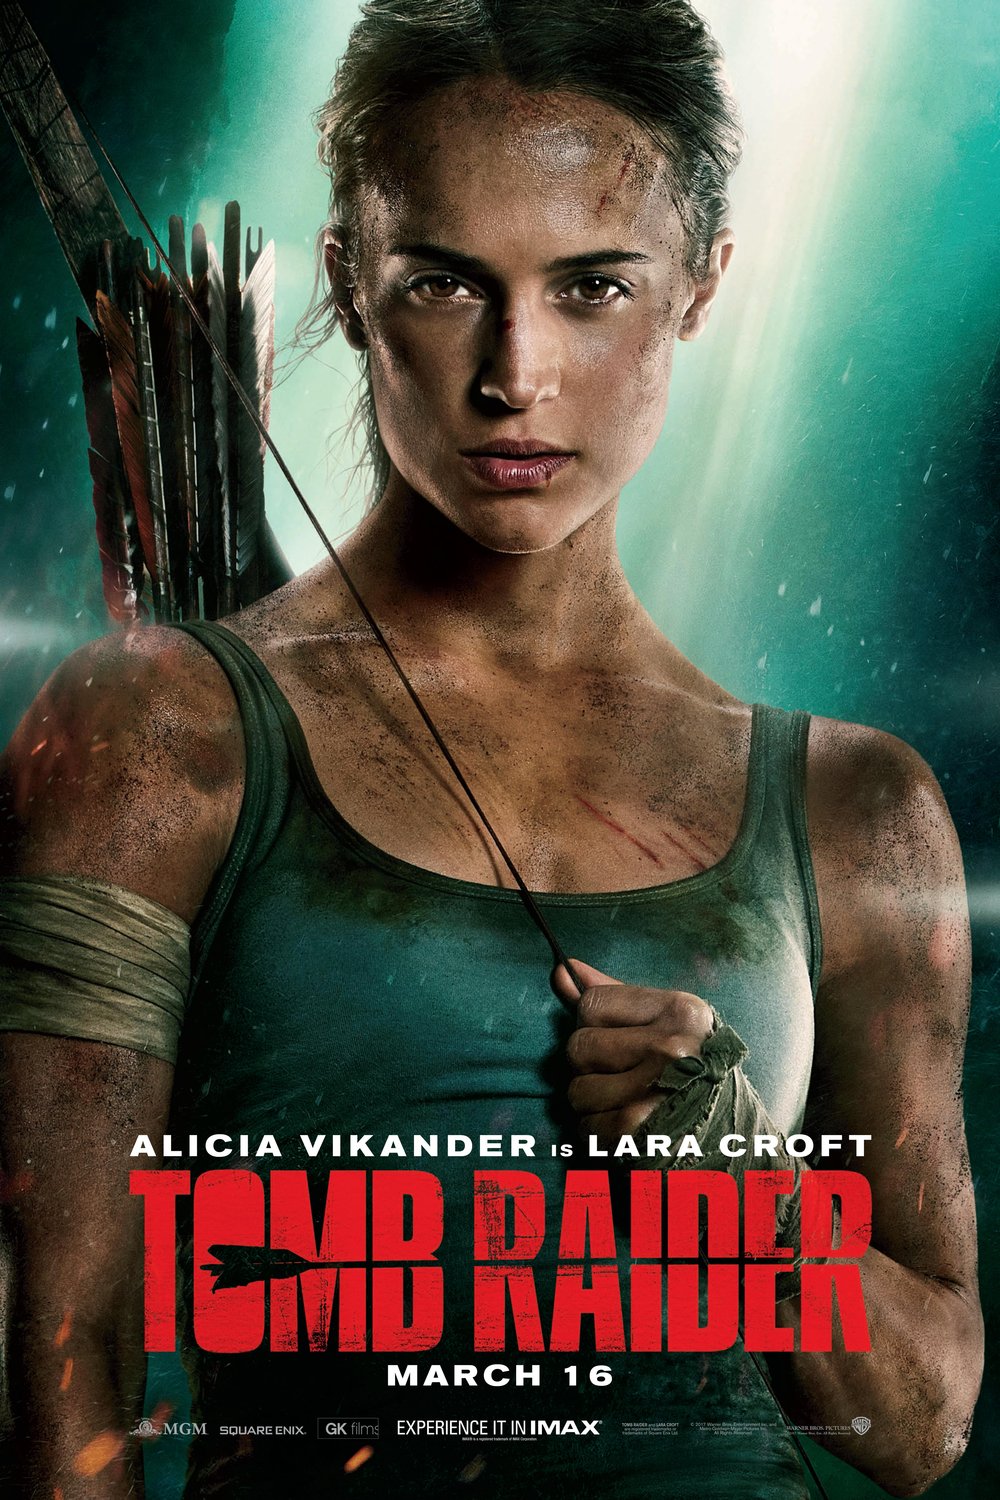 Poster of the movie Tomb Raider